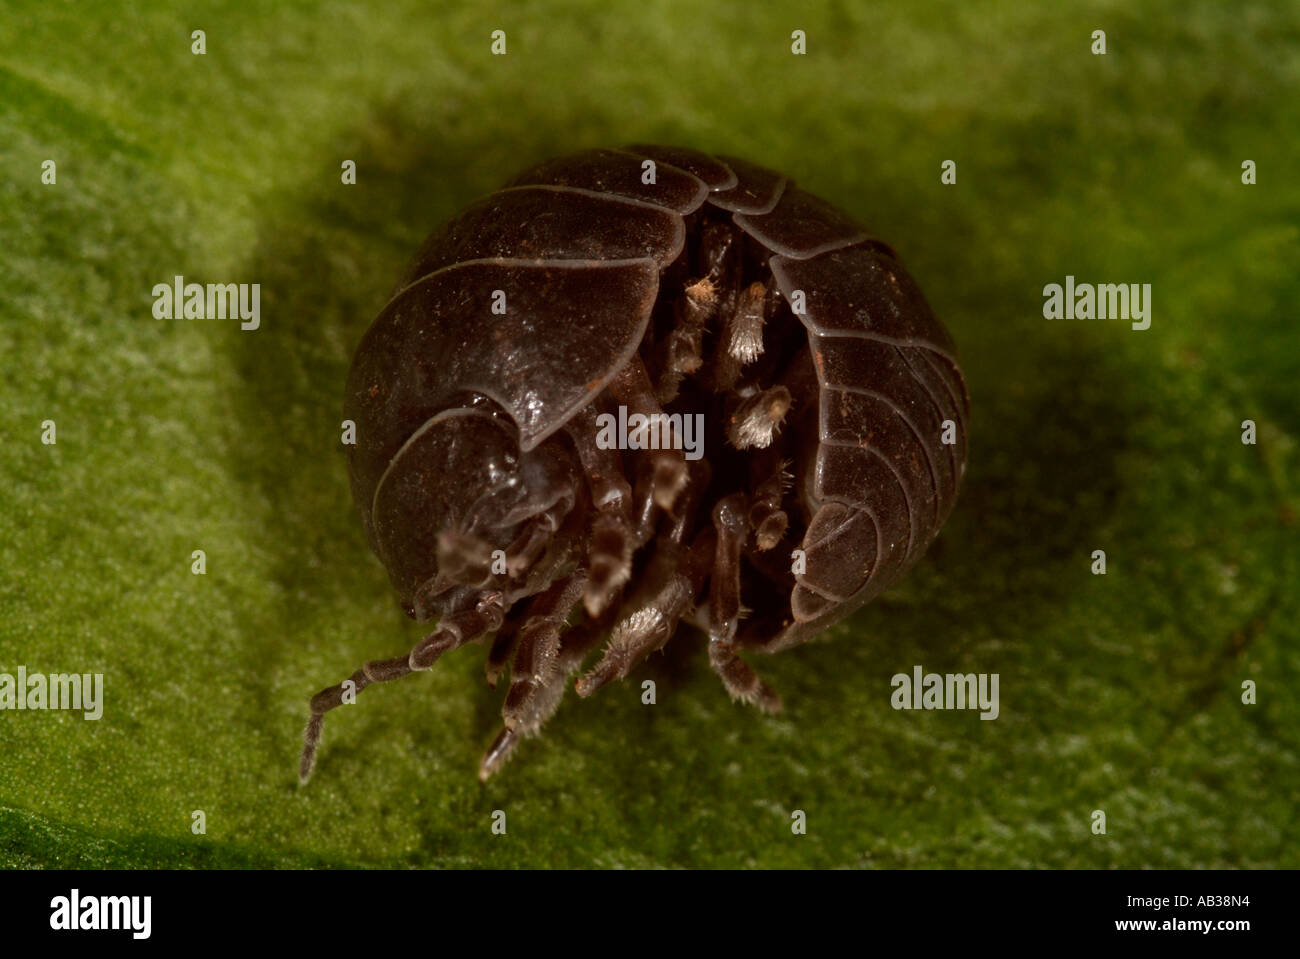 Pill Woodlice or pillbug Armadillidium vulgare curled curling out of ball sequence United Kingdom Stock Photo